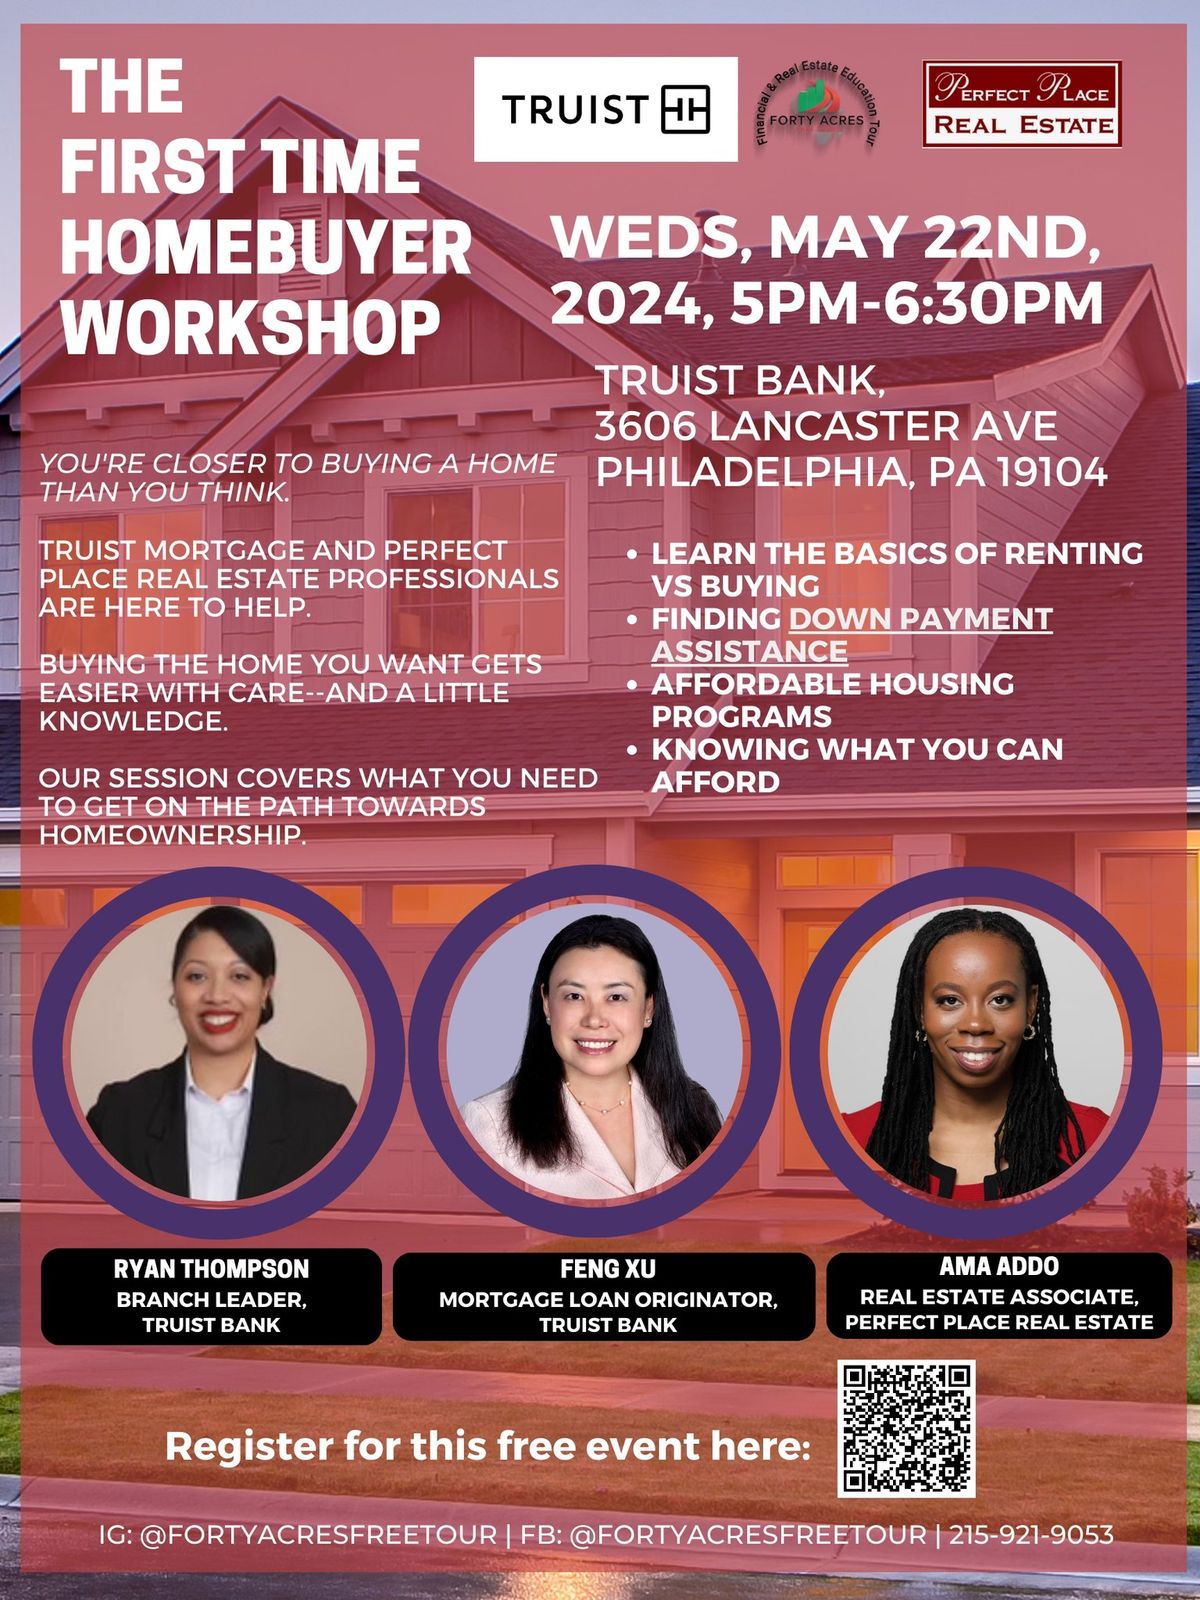 The First Time Homebuyer Workshop